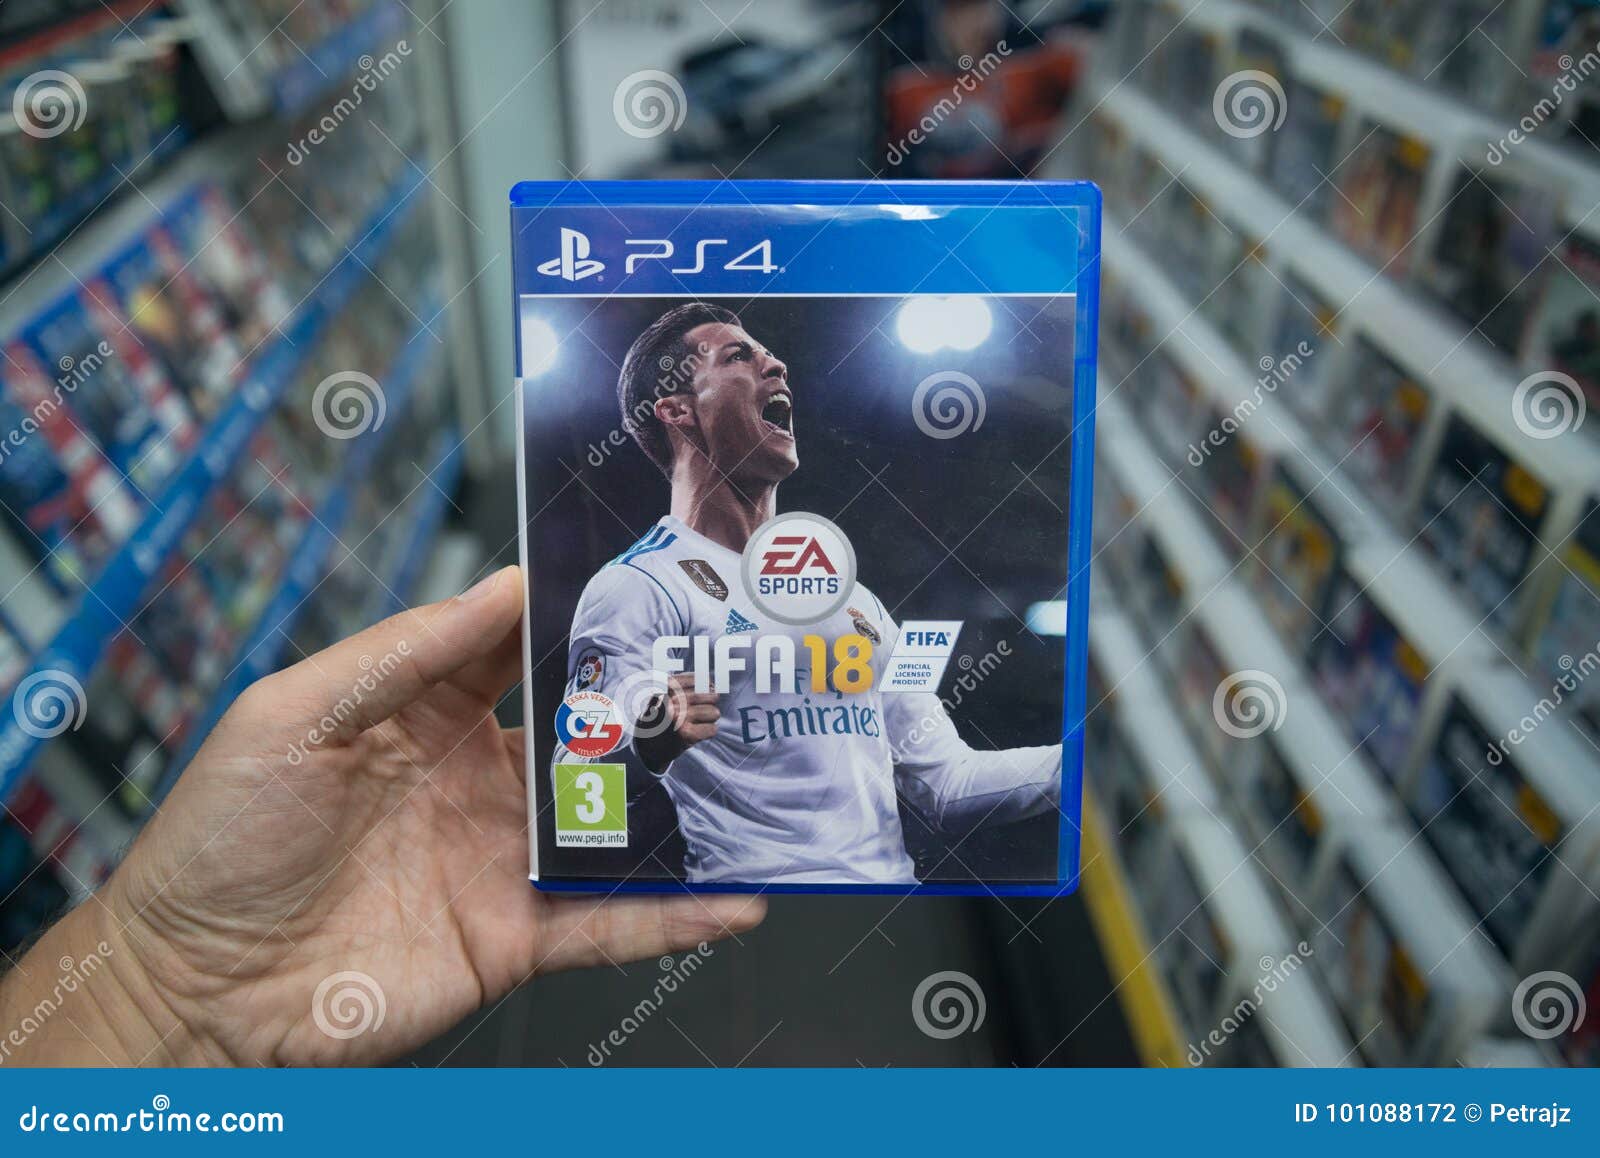  FIFA 18 PS4 Playstation 4 Game : Video Games